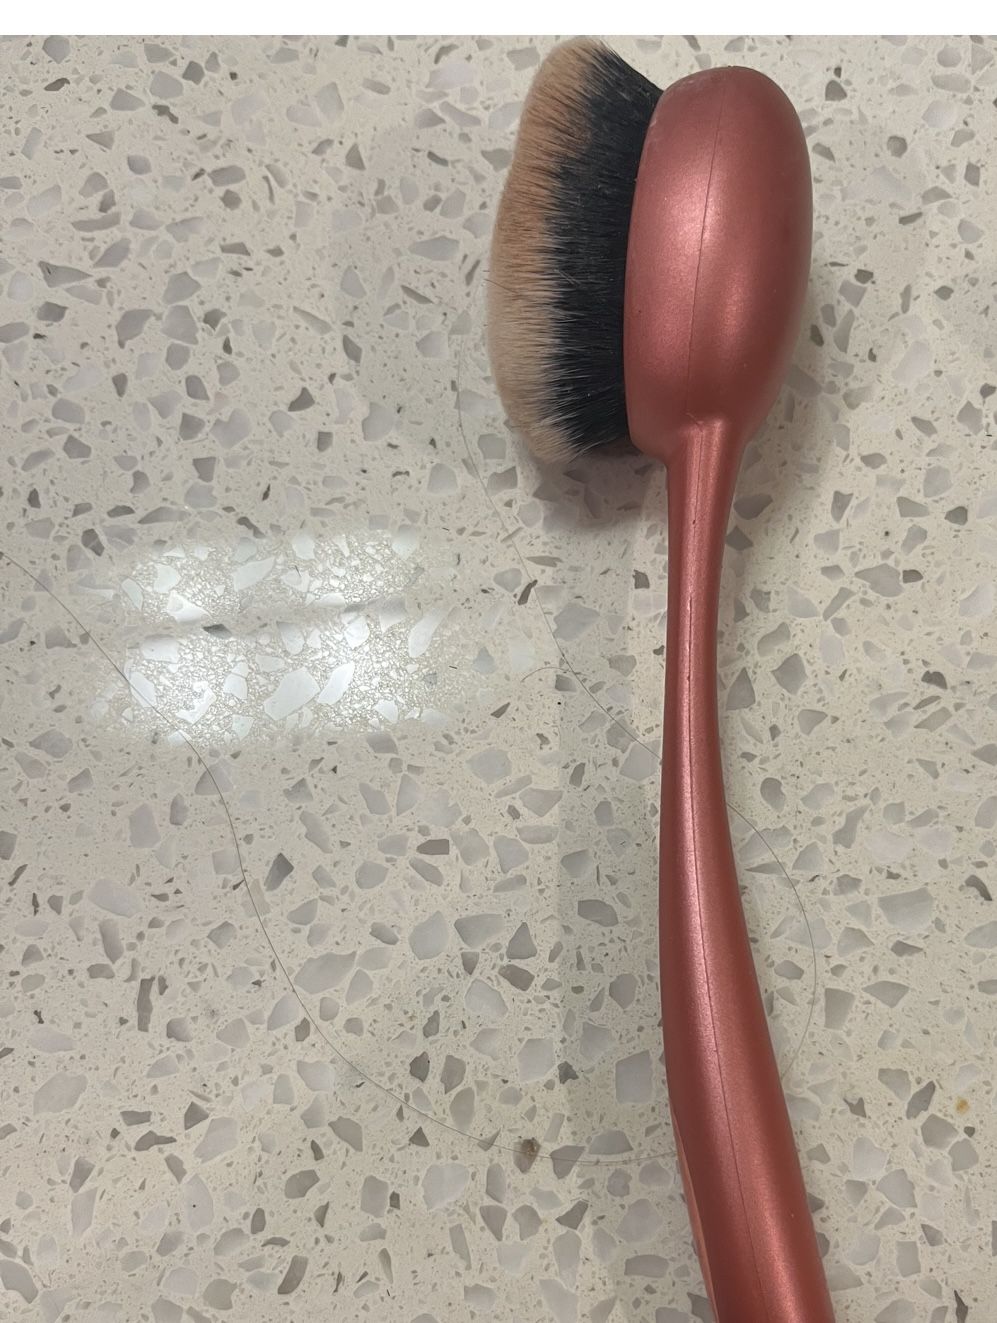 RT Blend and Blur Oval Foundation Makeup Brush